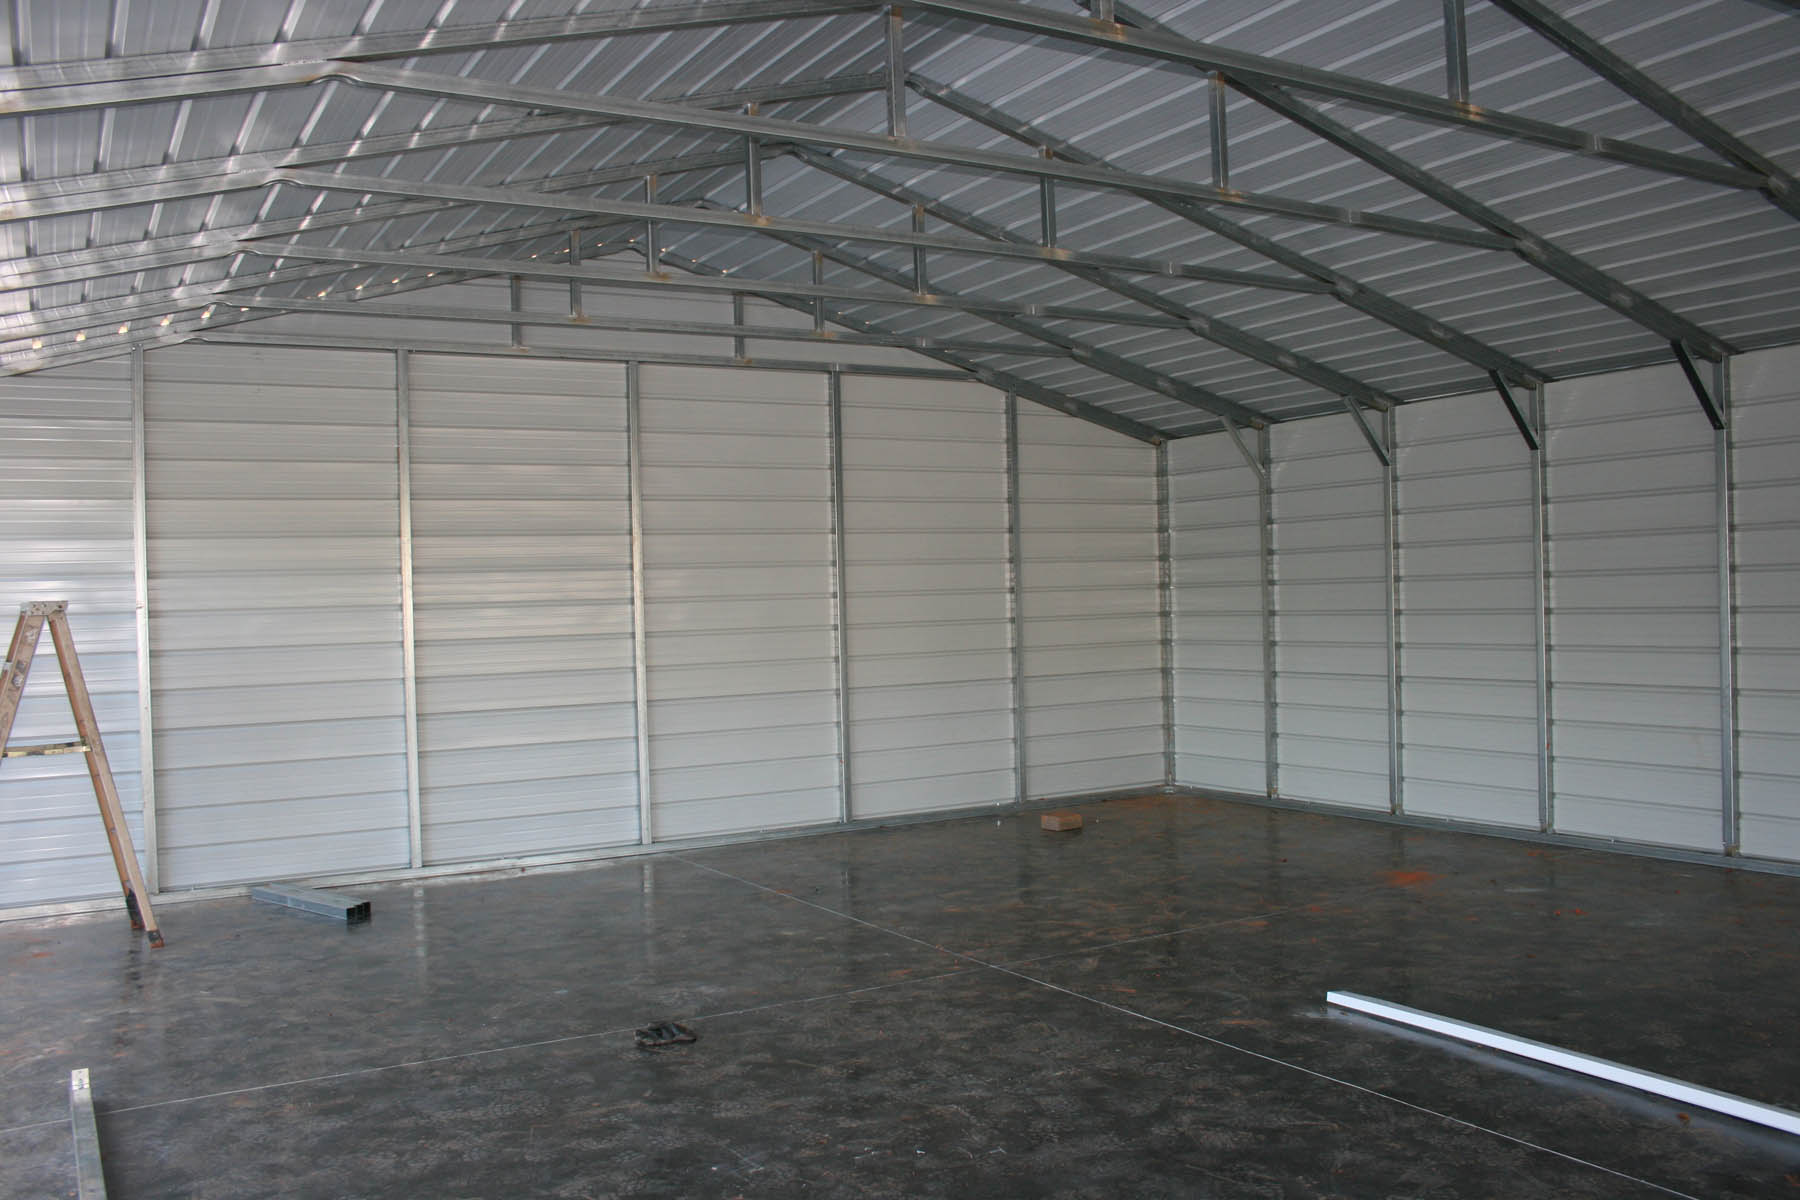 Internal view of a residential garage by steel building garages